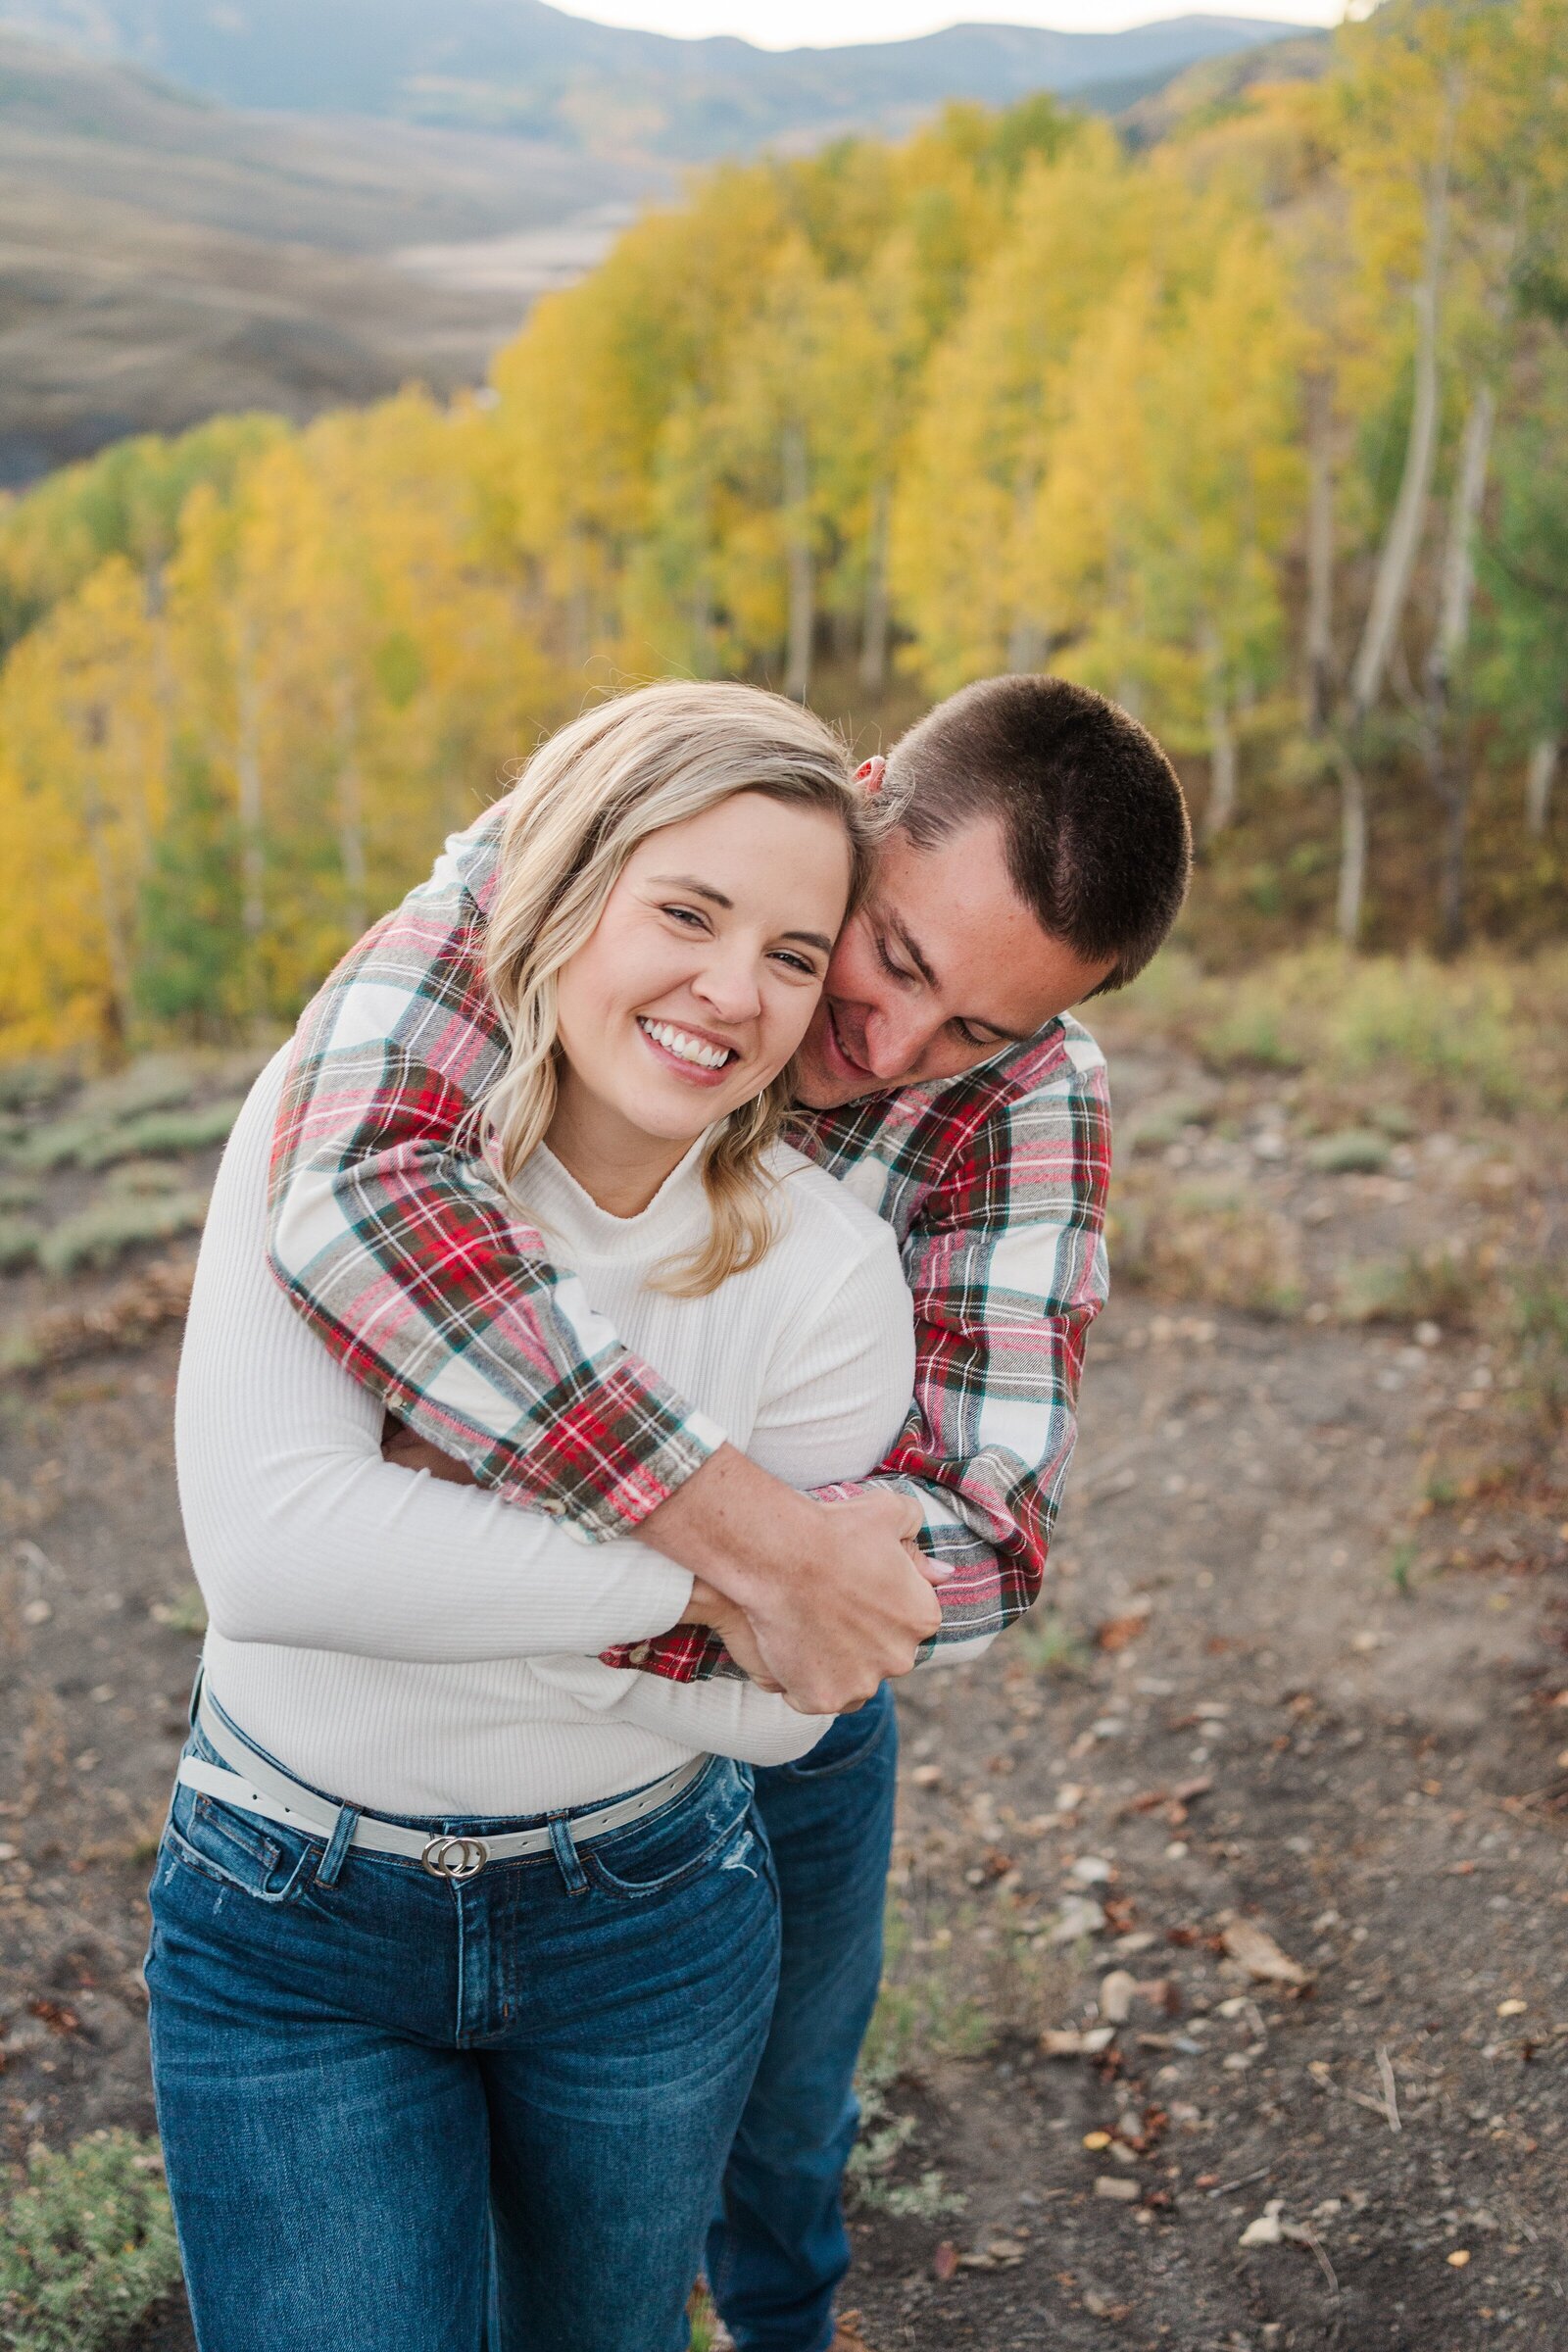 With years of experience, Sam Immer Photography provides professional photography services that capture the beauty and emotion of your love story in a natural and timeless way.